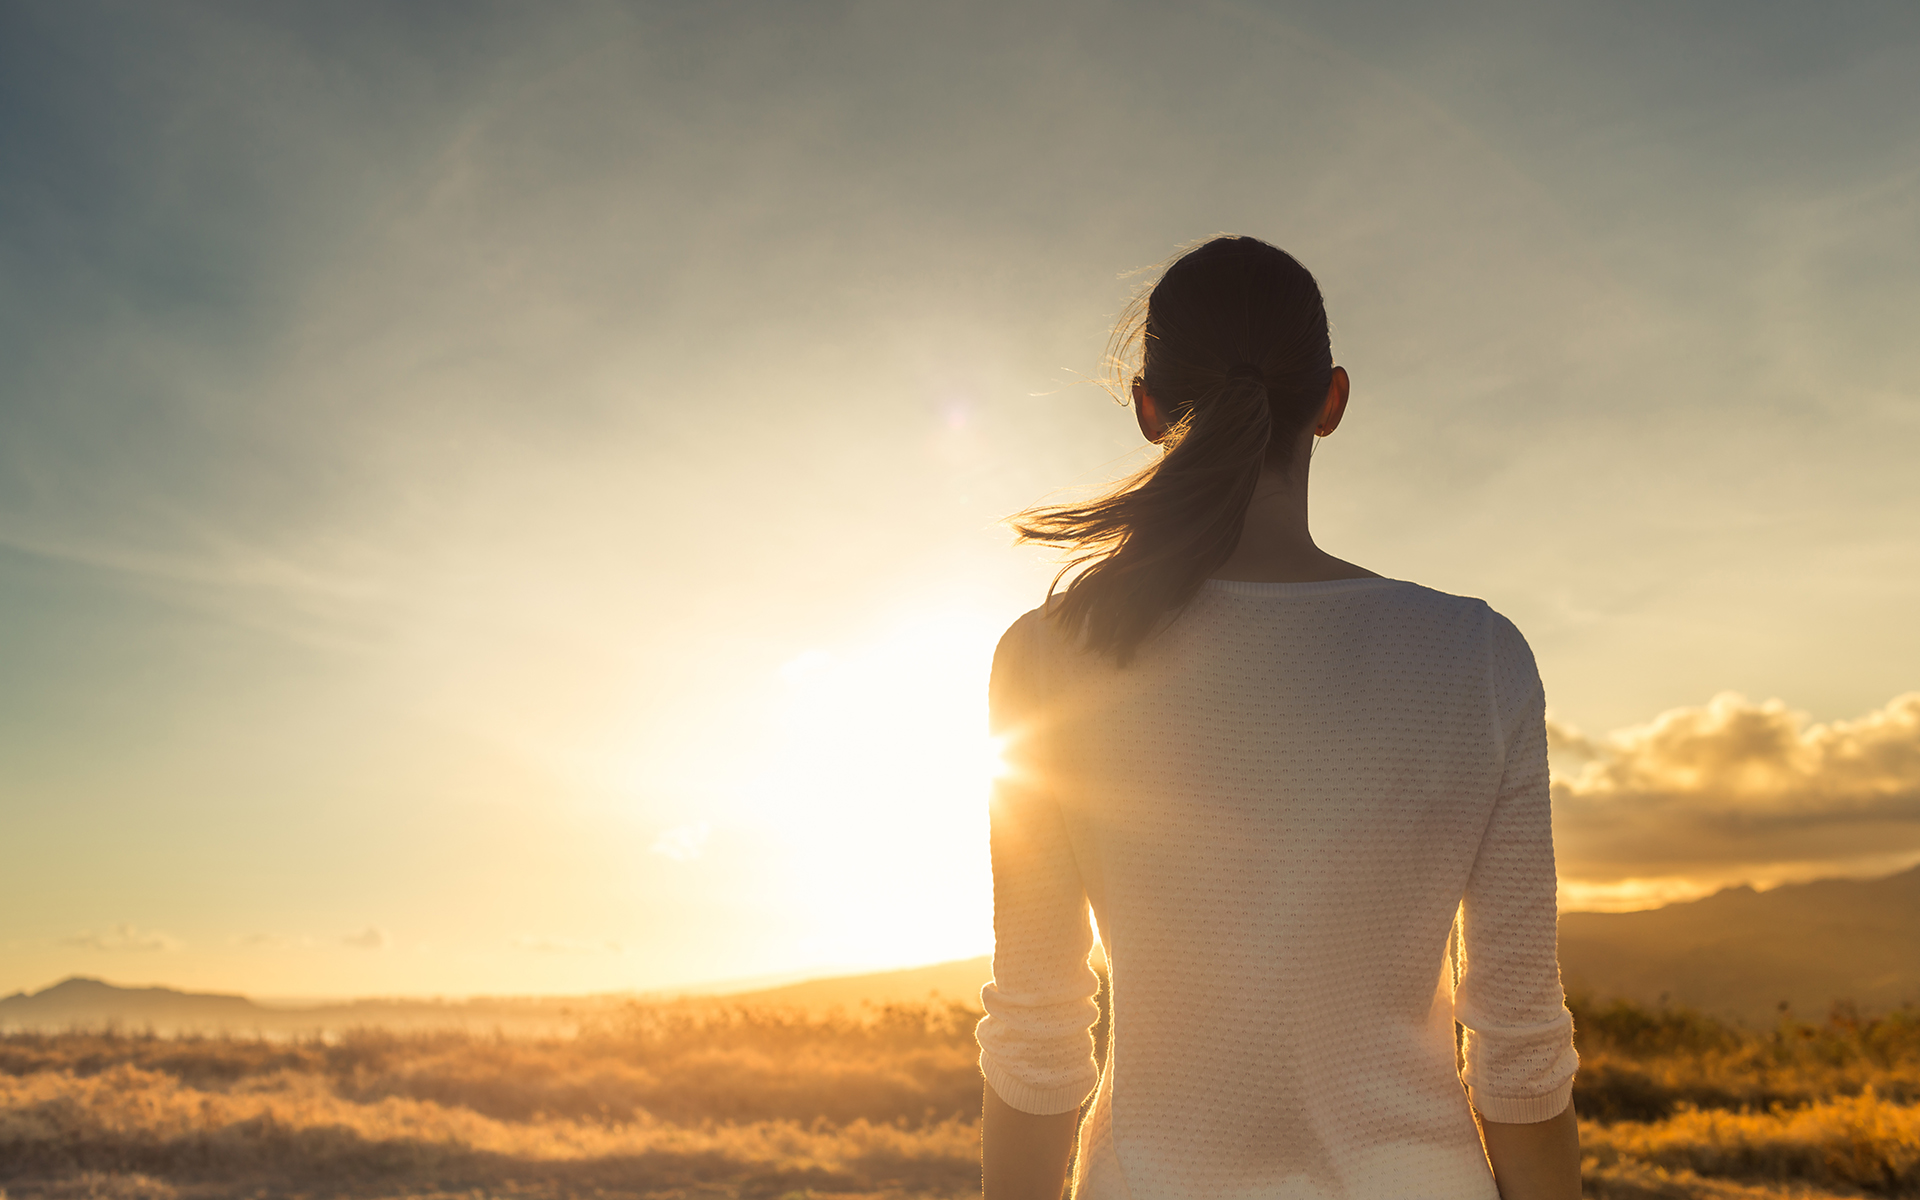 How to avoid feeling overwhelmed in stressful times - Woman admiring a sunset